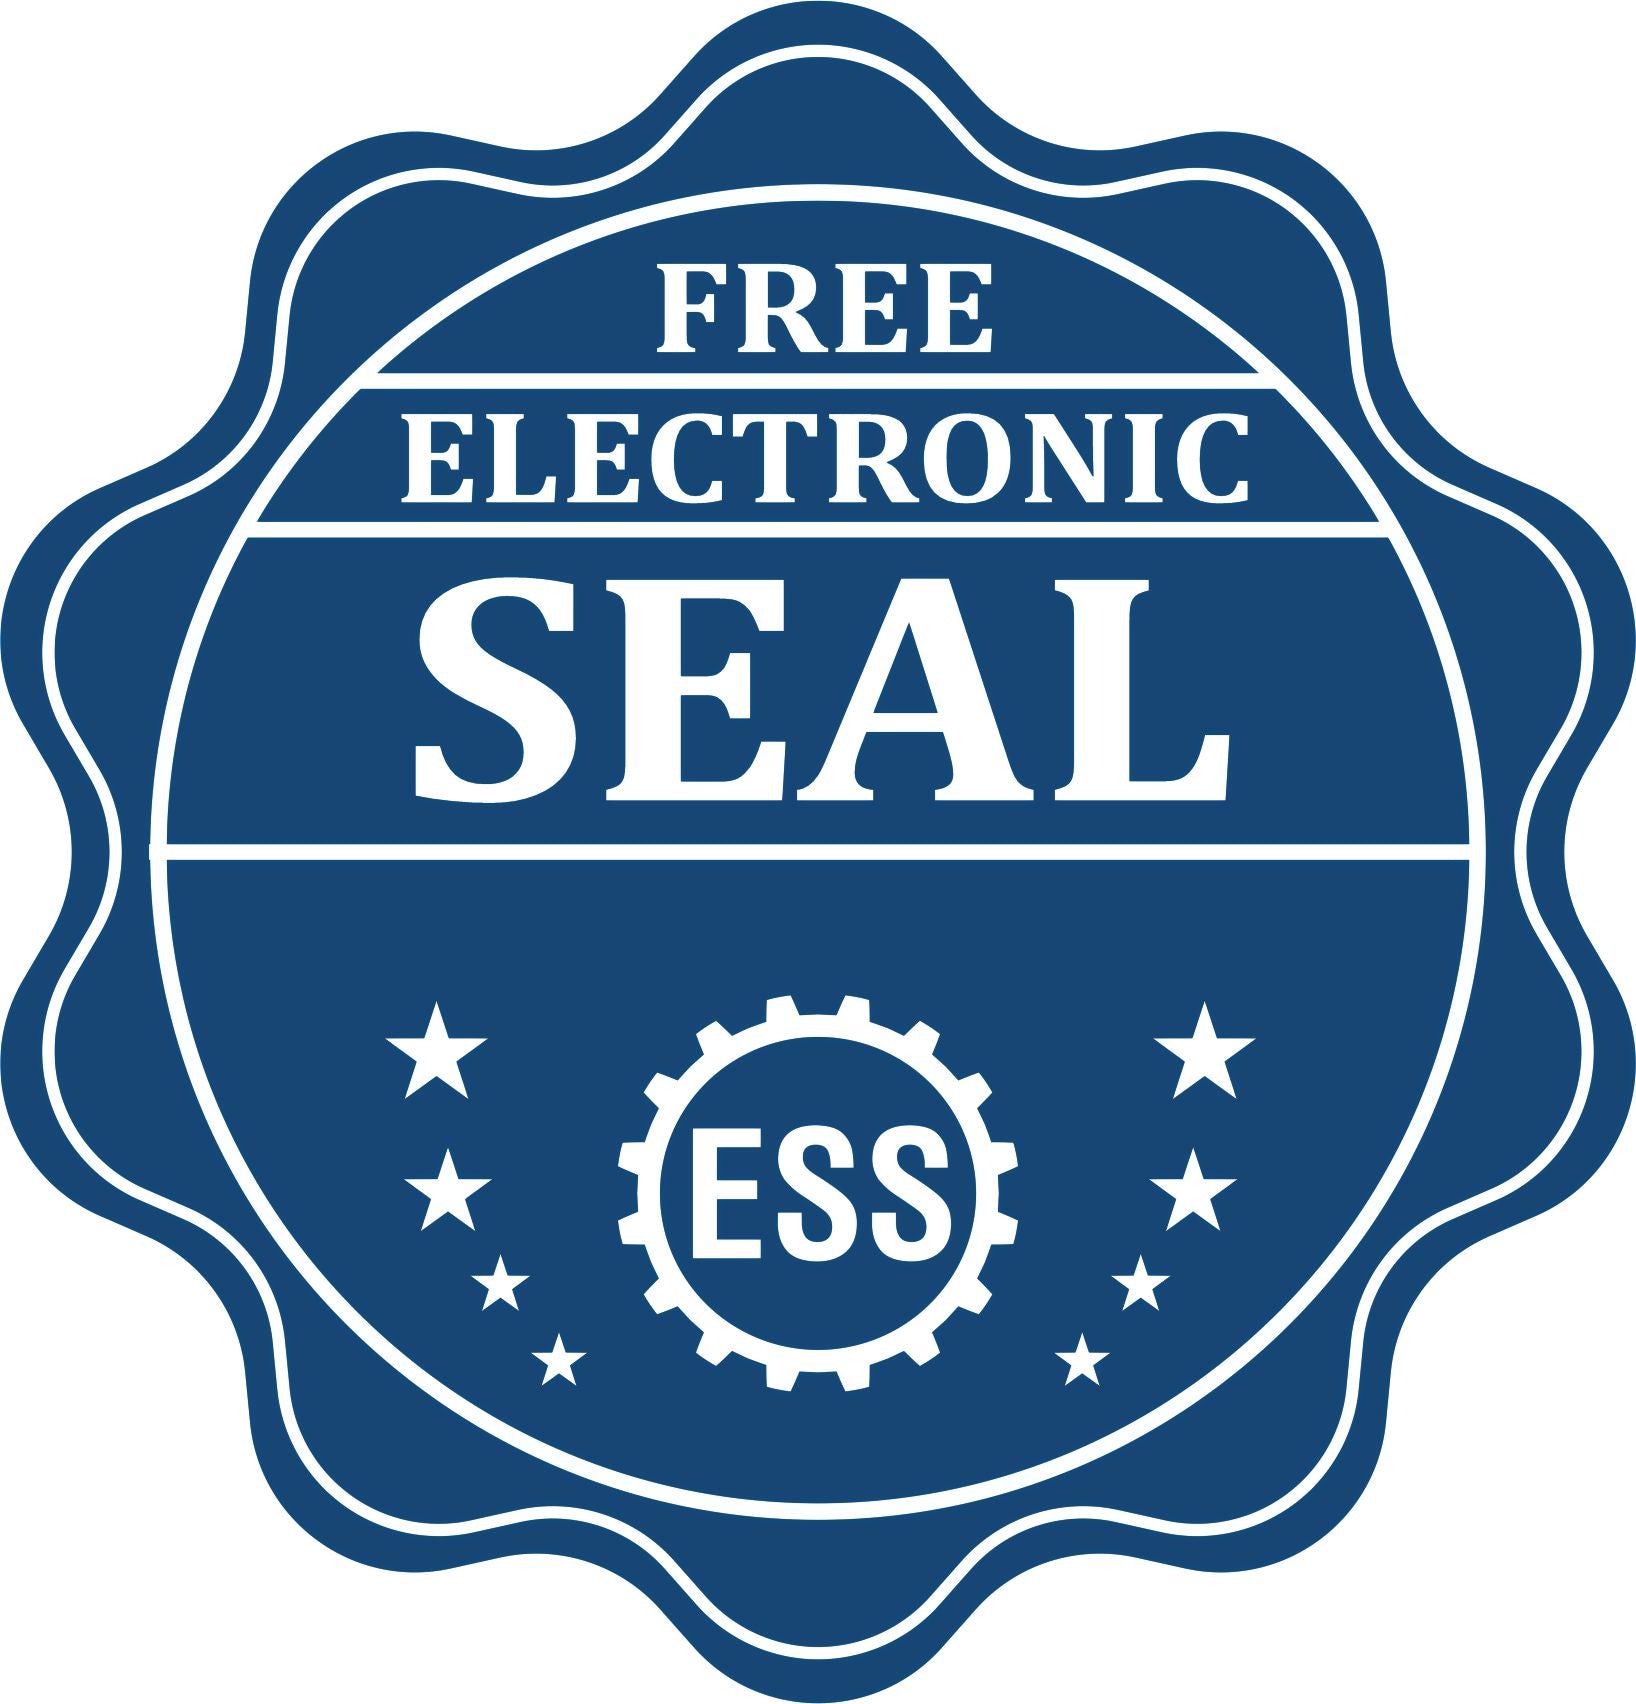 A badge showing a free electronic seal for the Handheld Mississippi Land Surveyor Seal with stars and the ESS gear on the emblem.